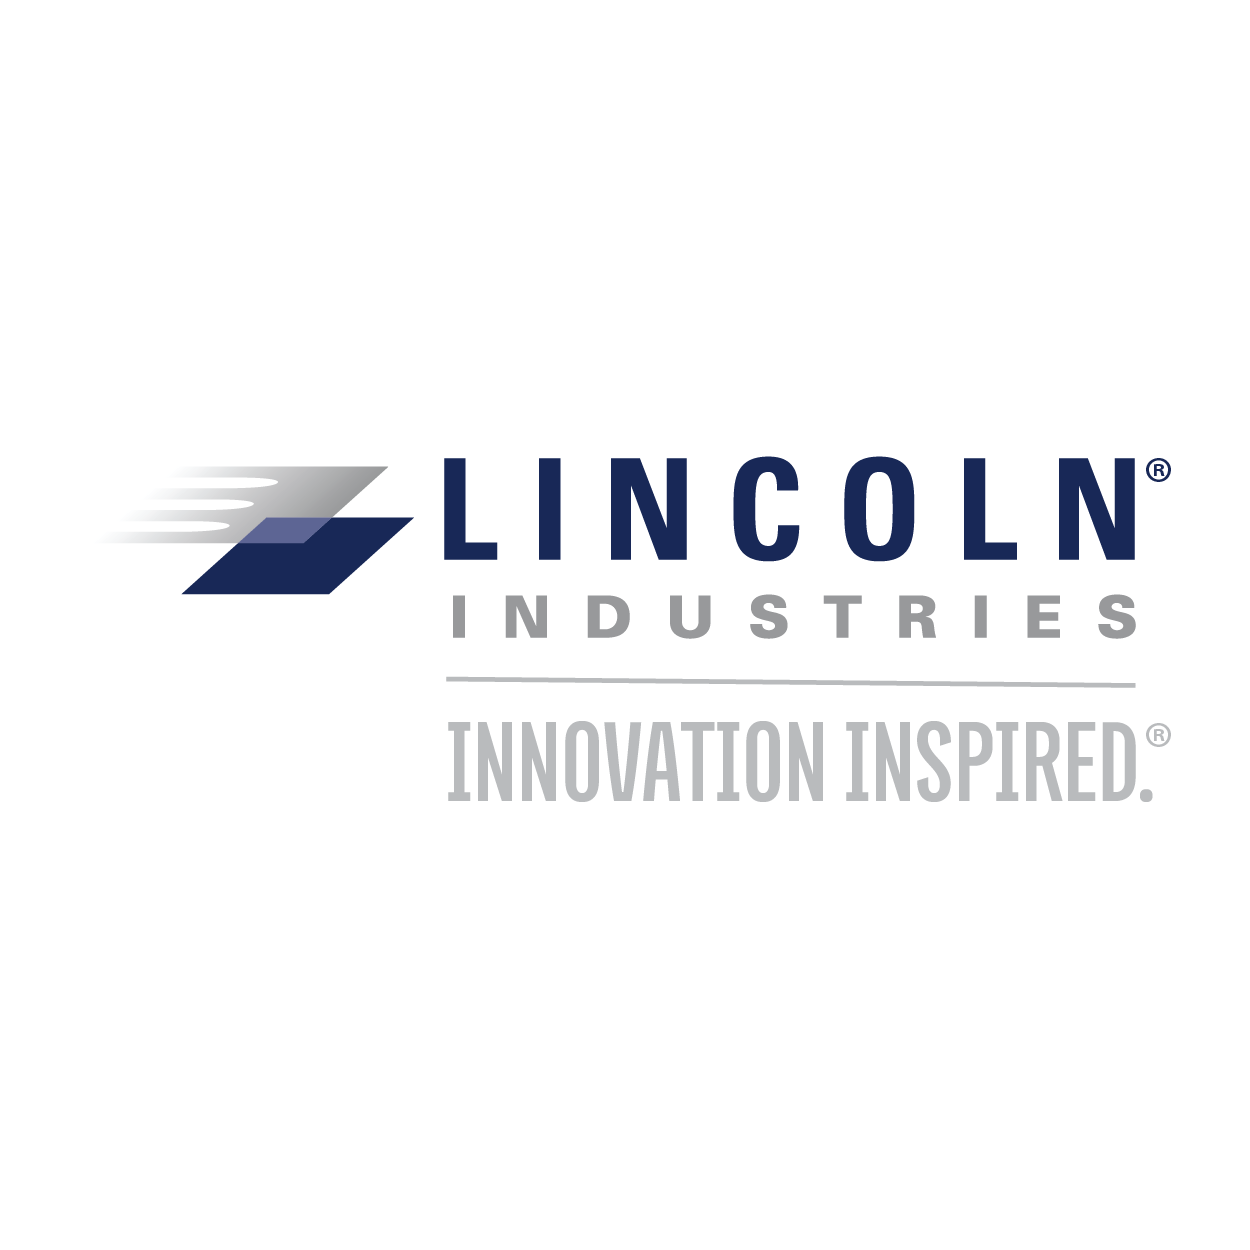 Lincoln Industries 